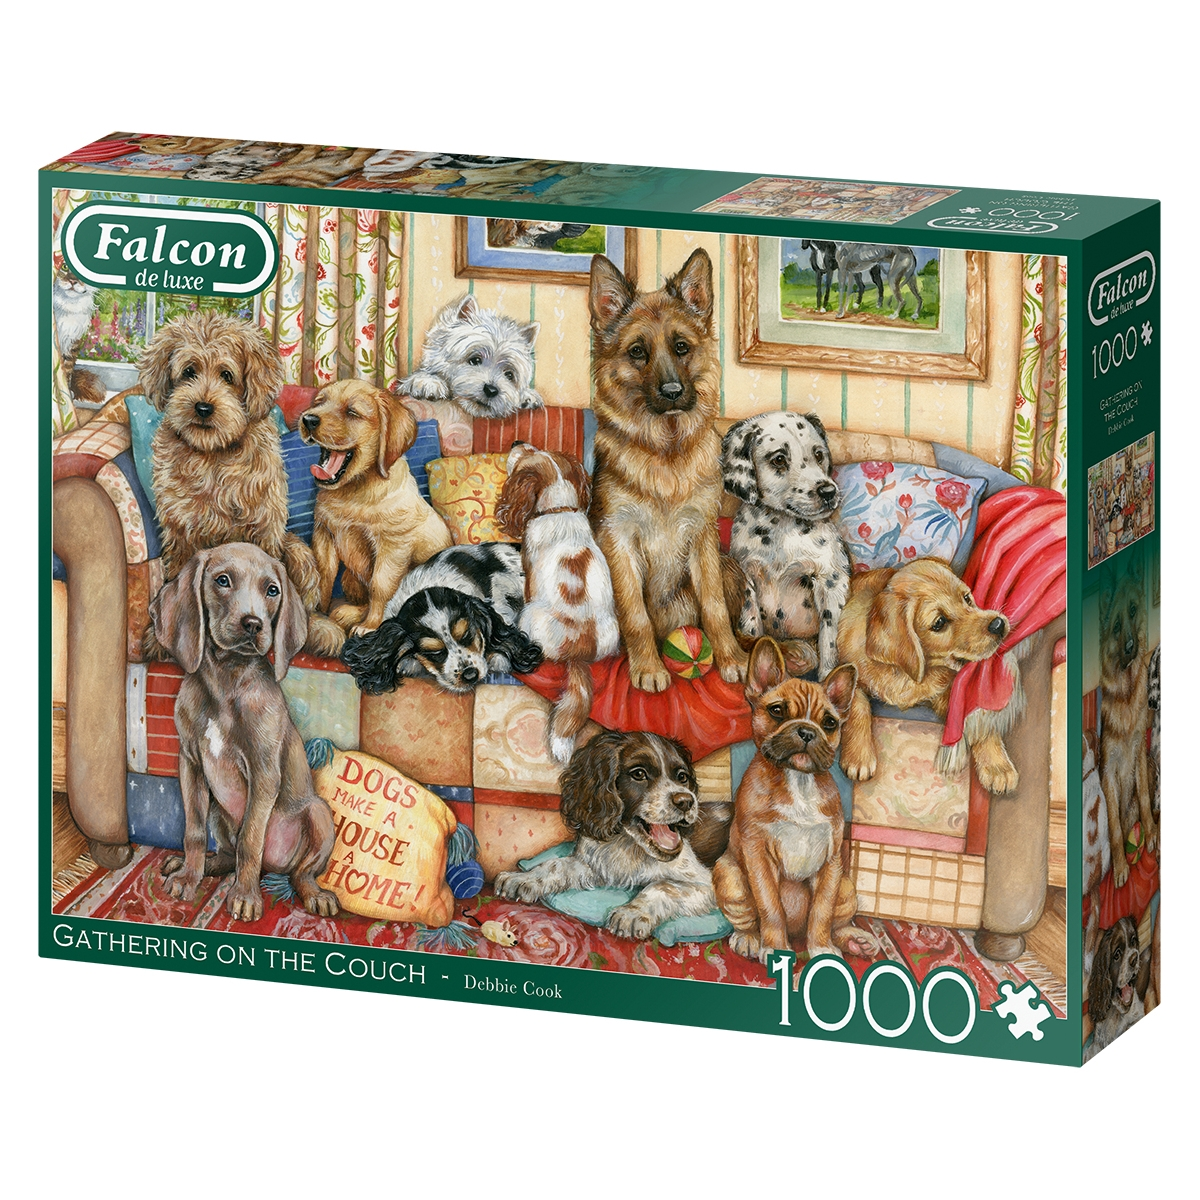 FALCON Jumbo 11293 Gathering Puzzle Couch-1000 Mehrfarben Teile The Dog Zubehör, on